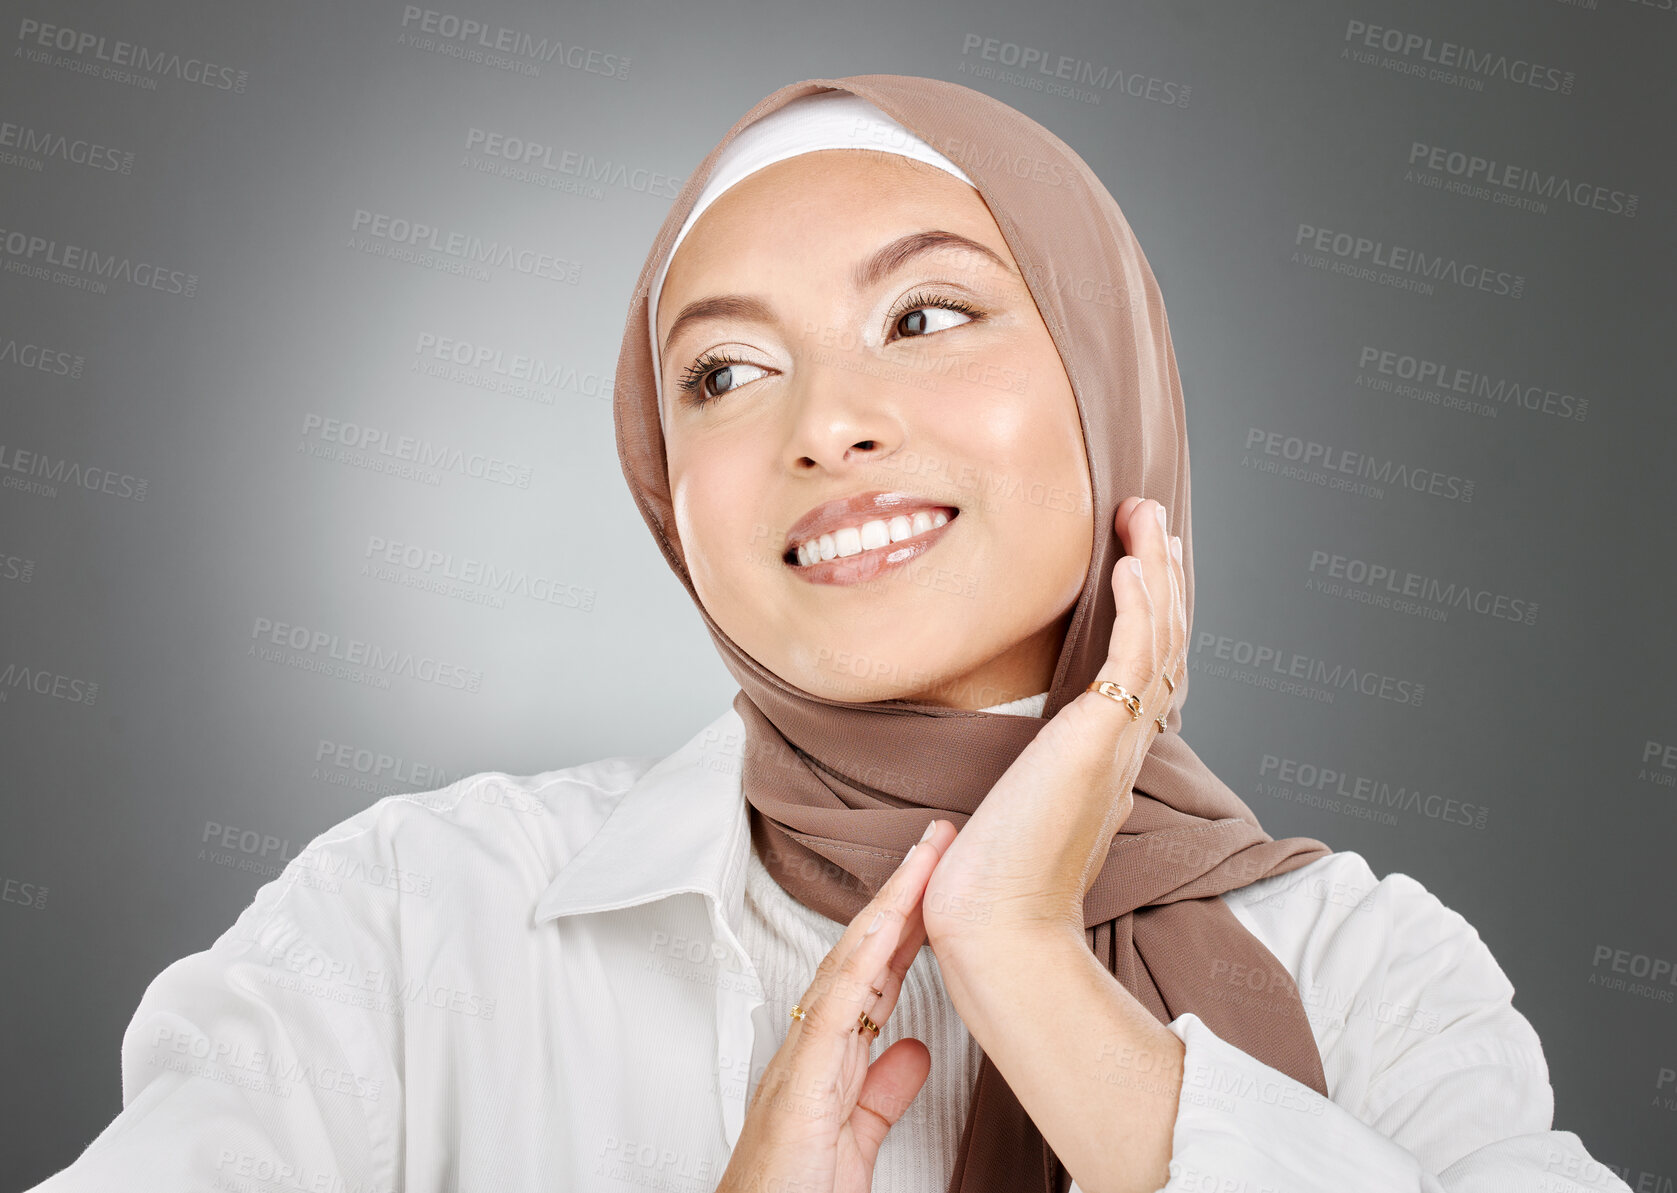 Buy stock photo Beautiful muslim woman posing in a studio wearing a hijab. Headshot of a happy and confident arab model standing against a grey background. Fashionable woman wearing a headscarf

